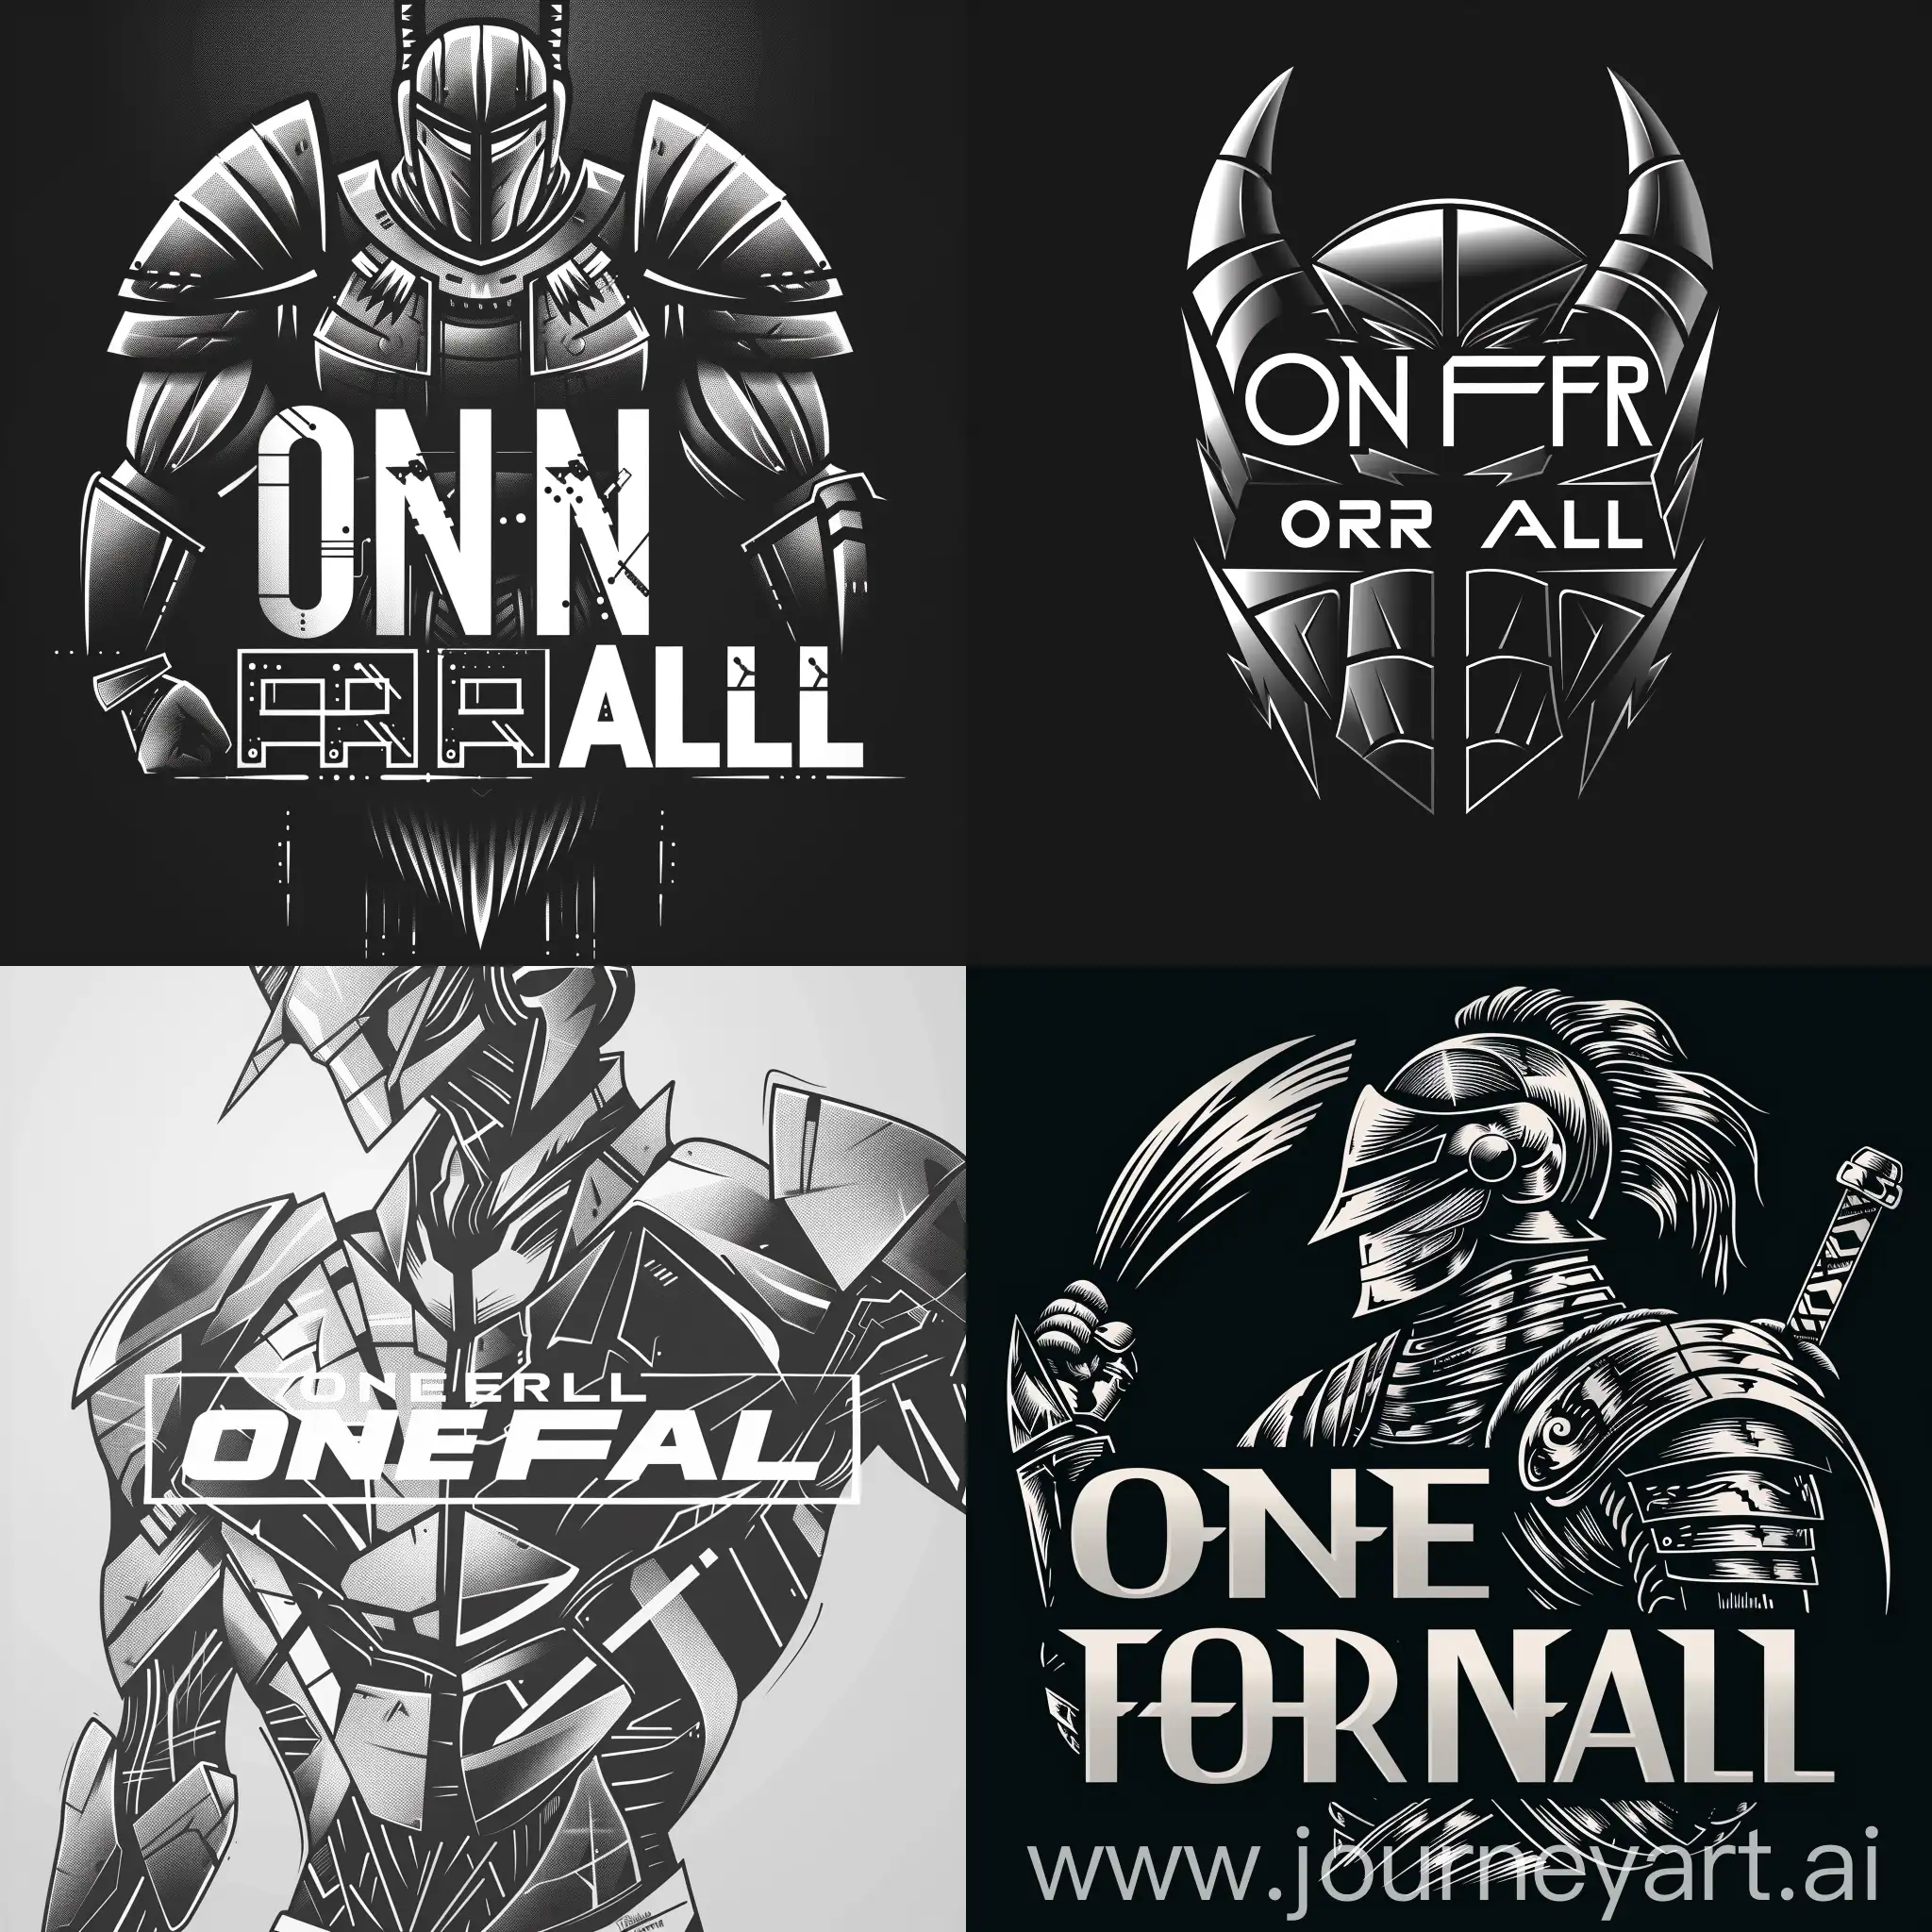 Title: "ONE FOR ALL: Warrior-Tech Fusion Logo"

Description:

"Create a logo for 'ONE FOR ALL,' an app blending advisory, fitness tracking, finance, chat, and AI assistance. Blend warrior, tech, monochrome colors. Capture warrior strength subtly, integrate futuristic tech elements seamlessly. Use monochrome palette for sophistication. Include 'ONE FOR ALL' prominently in legible yet distinctive typography. Ensure balance and cohesion, conveying unity, empowerment, and innovation. Prioritize clarity and visual impact."